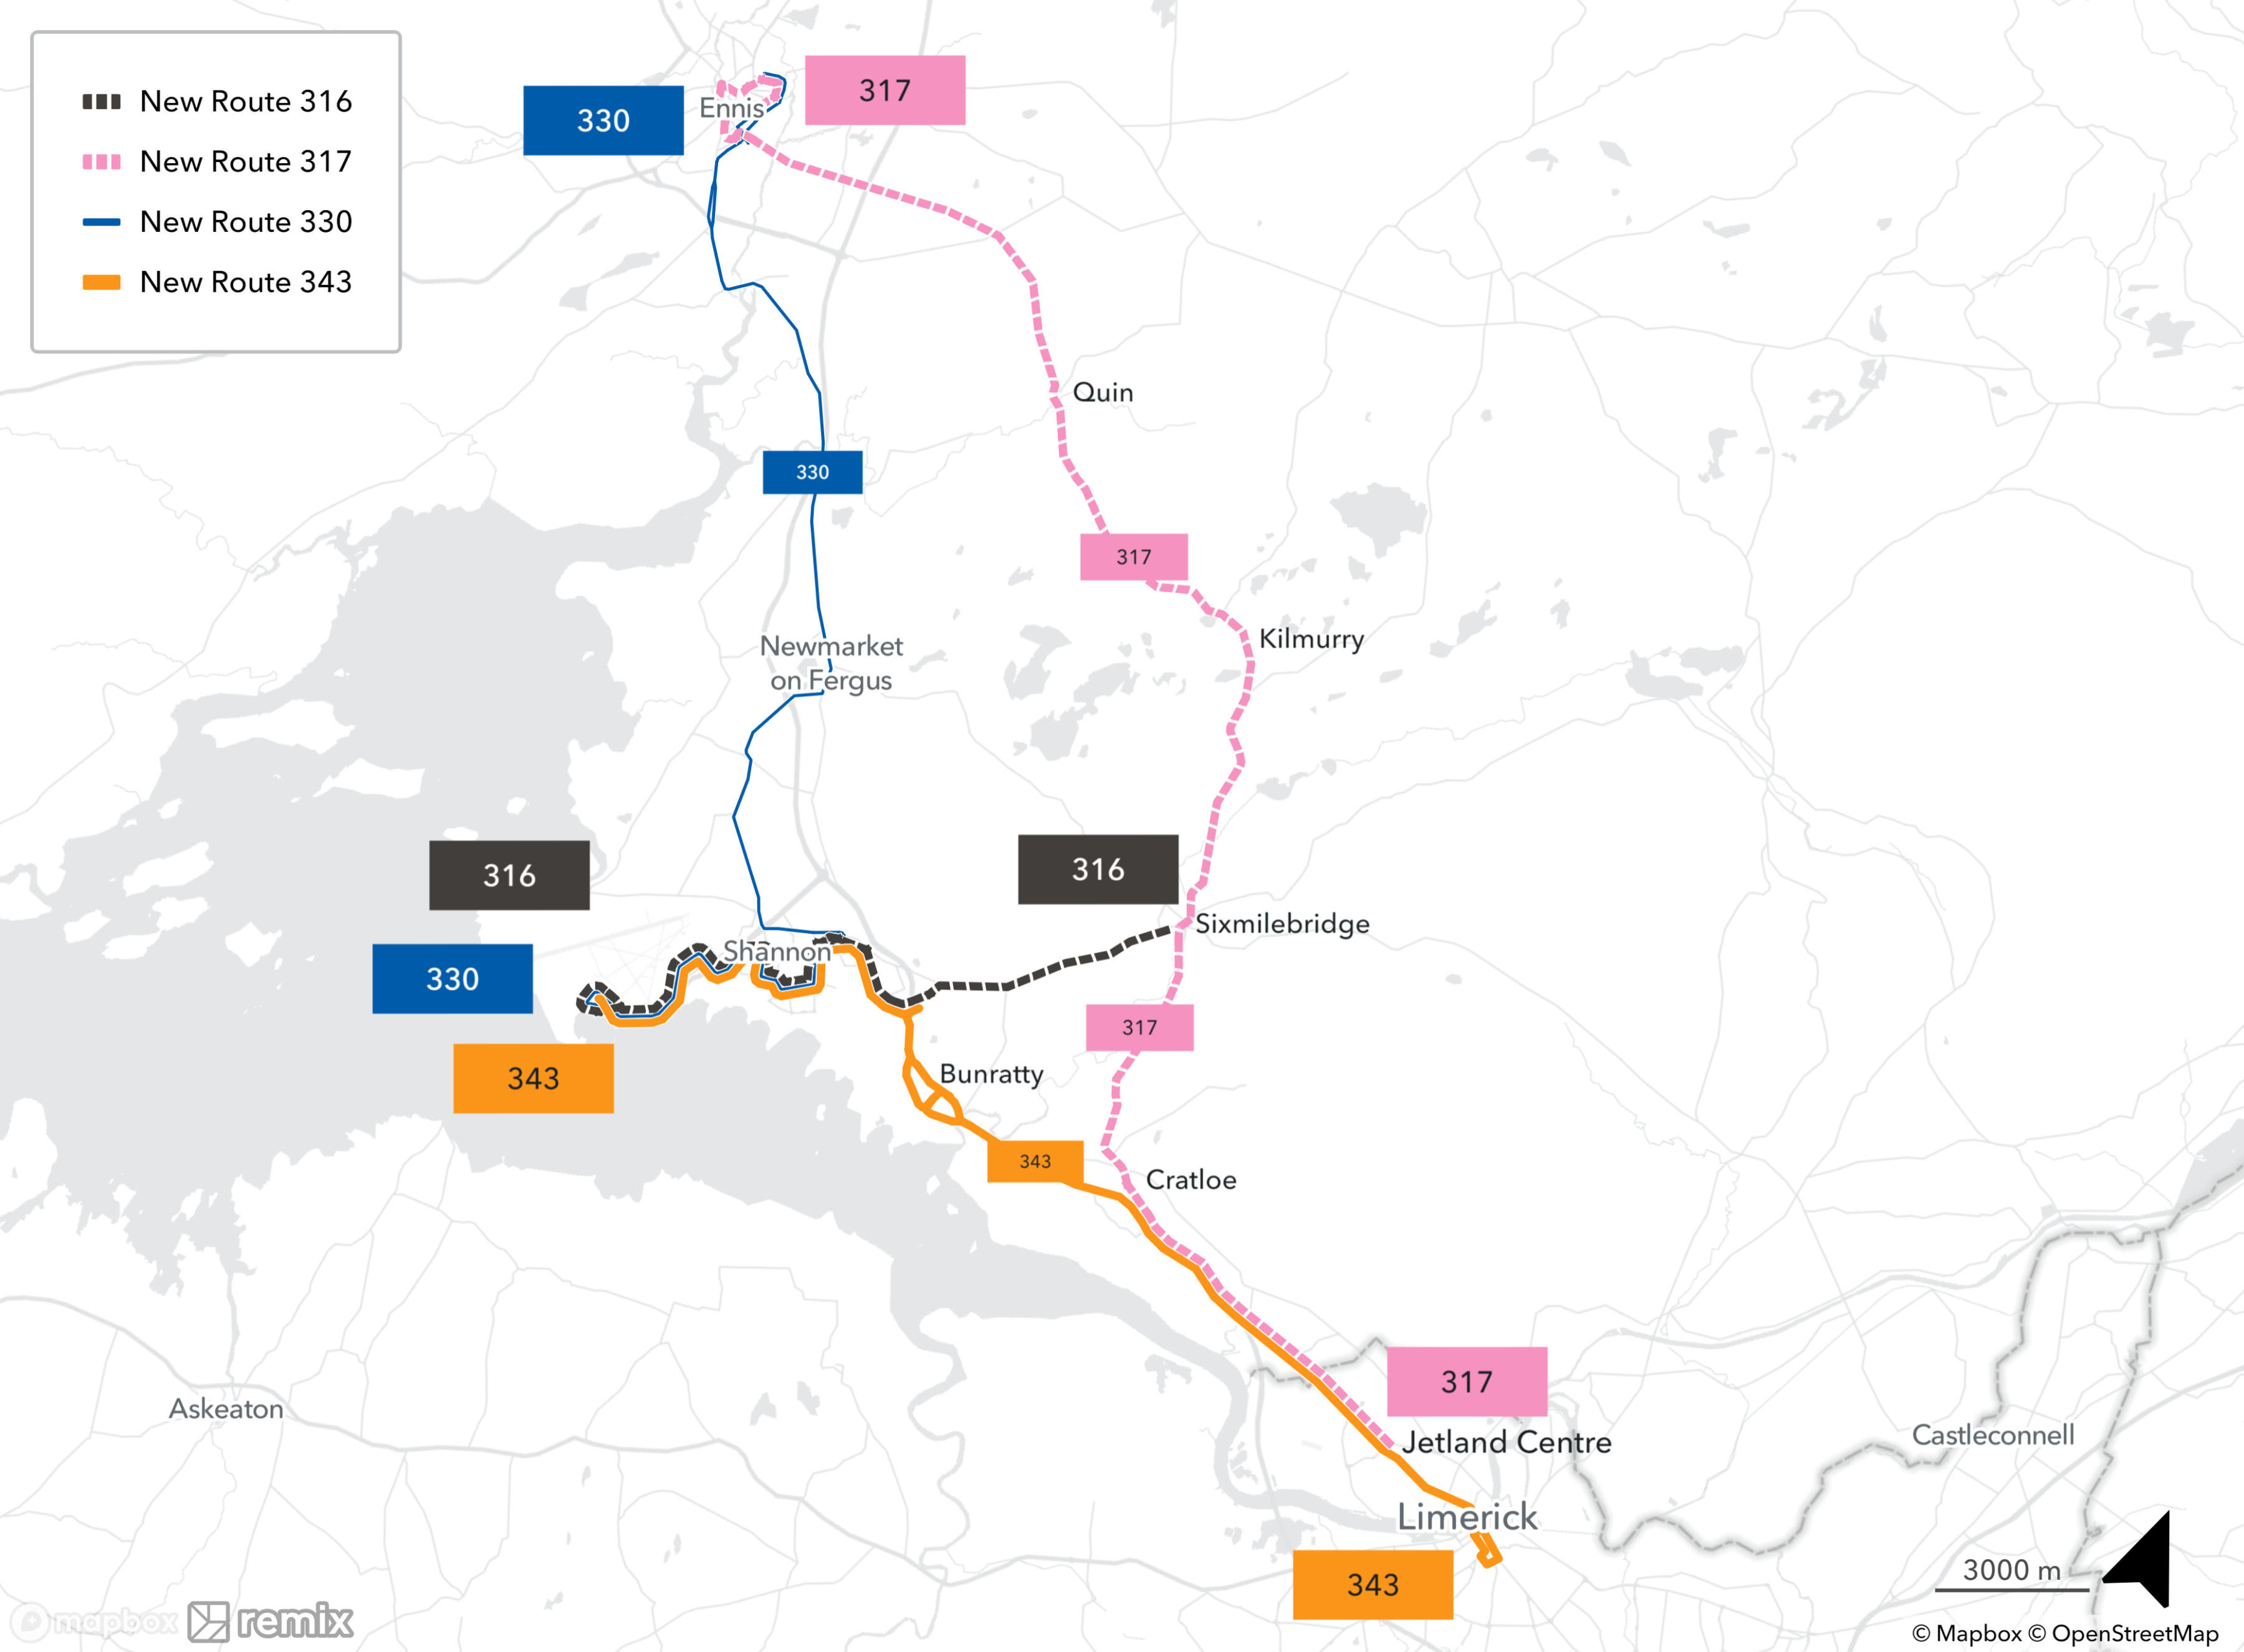 A map showing the four proposed new bus routes in full. New Route 343 will run between Limerick and Shannon via Bunratty; New Route 330 will run between Ennis and Shannon via Newmarket-on-Fergus; New Route 316 will run between Sixmilebridge and Shannon; New Route 316 will run between Ennis and the Jetland Shopping Centre in Limerick via Quin, Kilmurry, Sixmilebridge and Cratloe.”